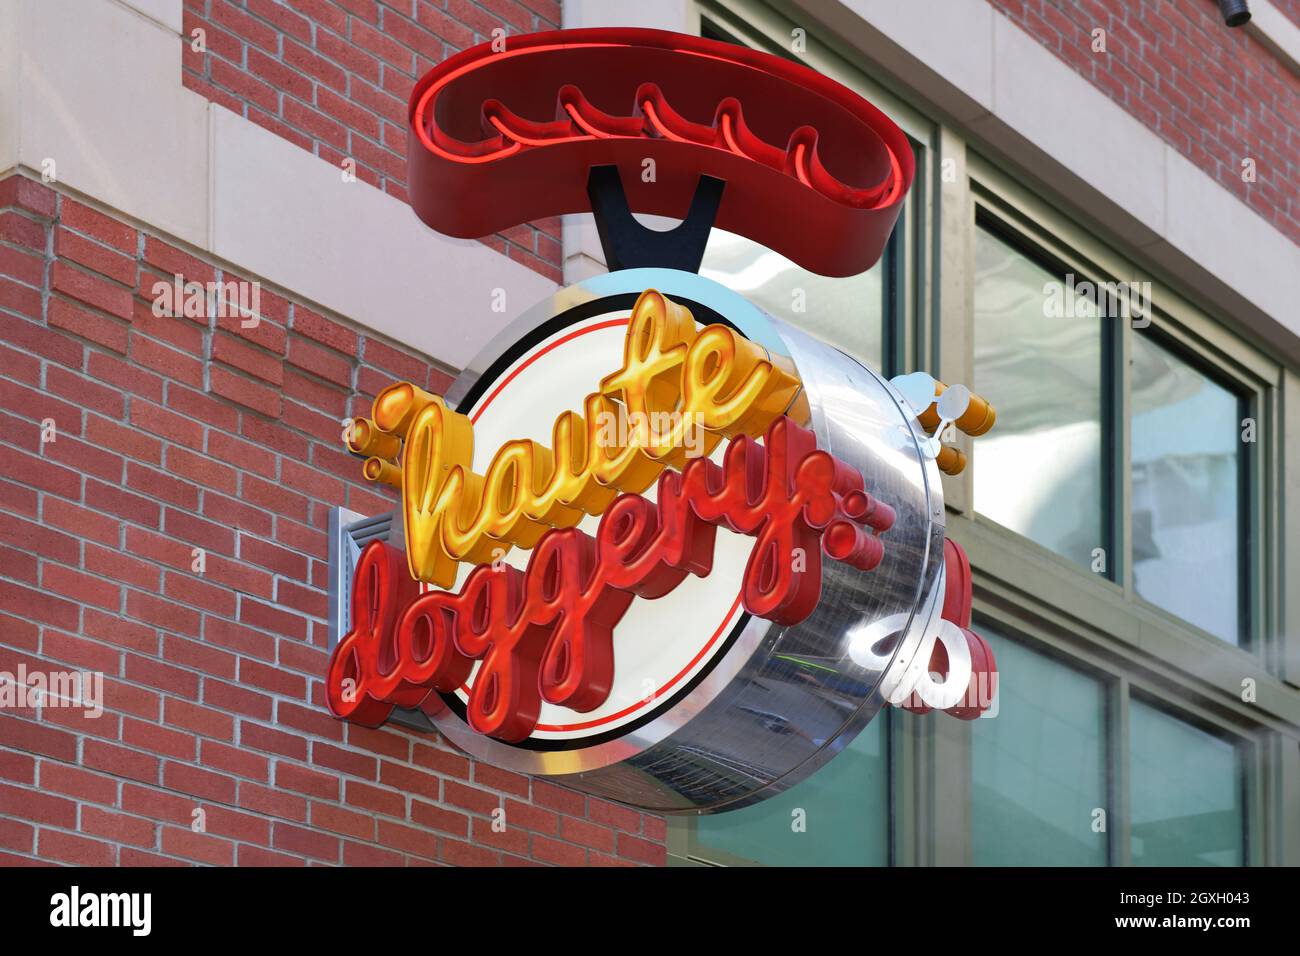 Nevada USA, 09-05-21 This is the illuminated sign for the Haute Doggery hot dog stand located on The Linq Promenade in Las Vegas. Stock Photo